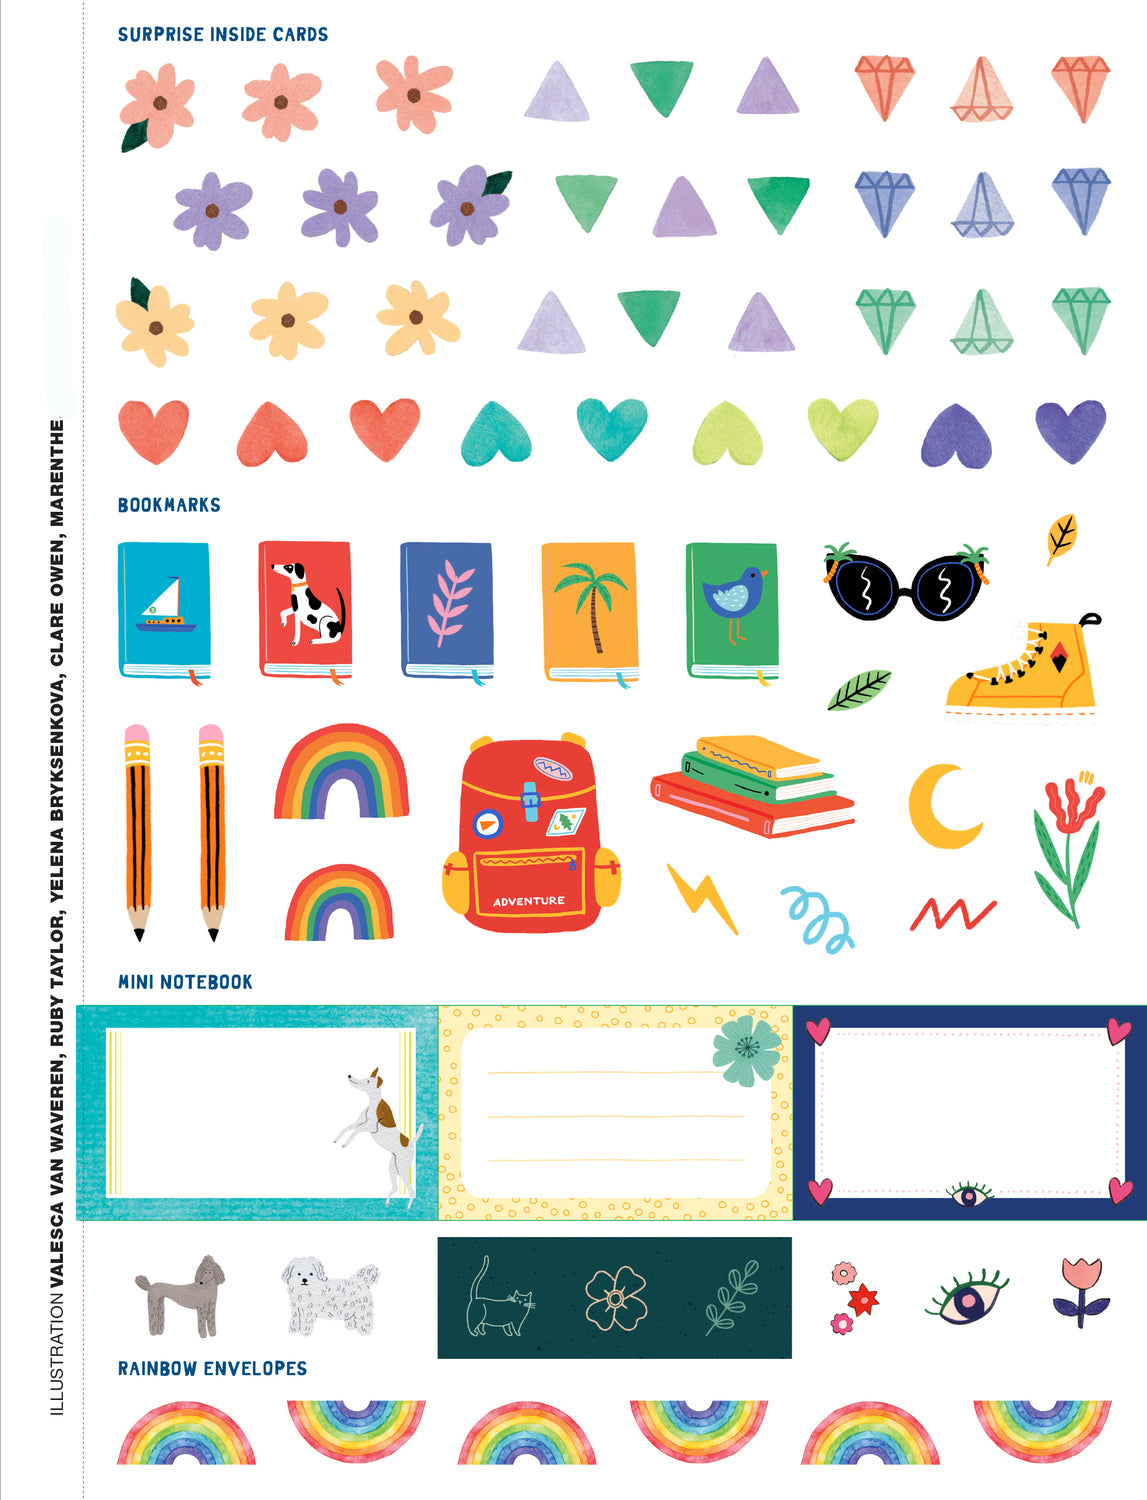 The Kids' Book of Sticker Love: Paper Projects to Make & Decorate